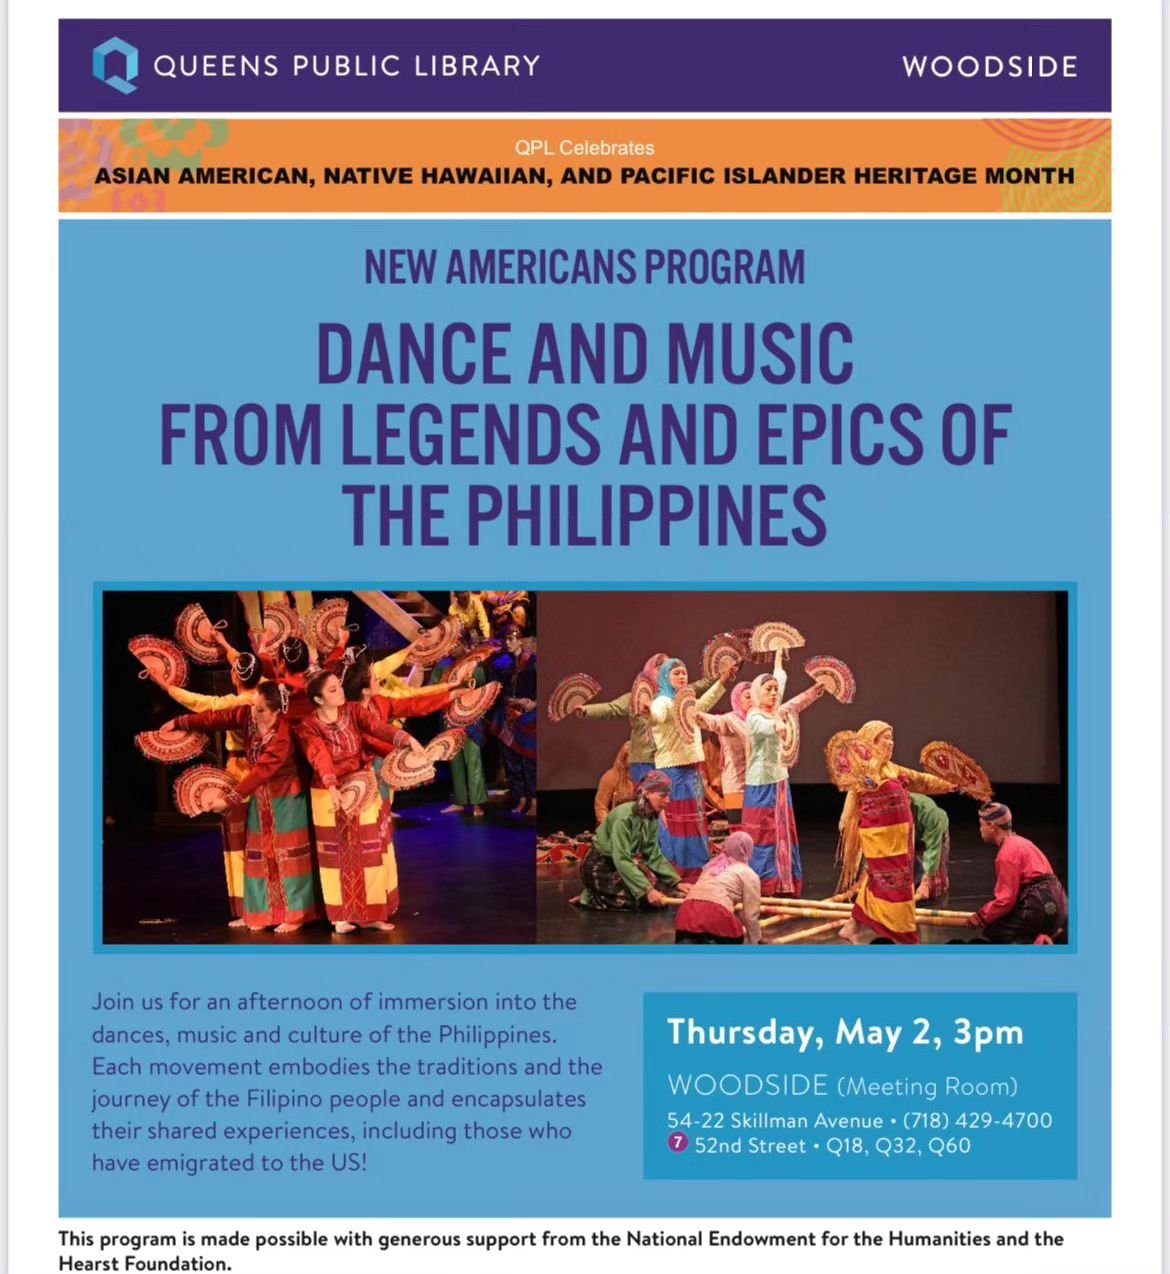 Kicking off AANHPI (Asian American, Native Hawaiian, and Pacific Islander) Heritage Month by performing today 3pm at Queens Public Library (WOODSIDE)! If you've ever been curious about learning more about the indigenous cultures of the Philippines, t